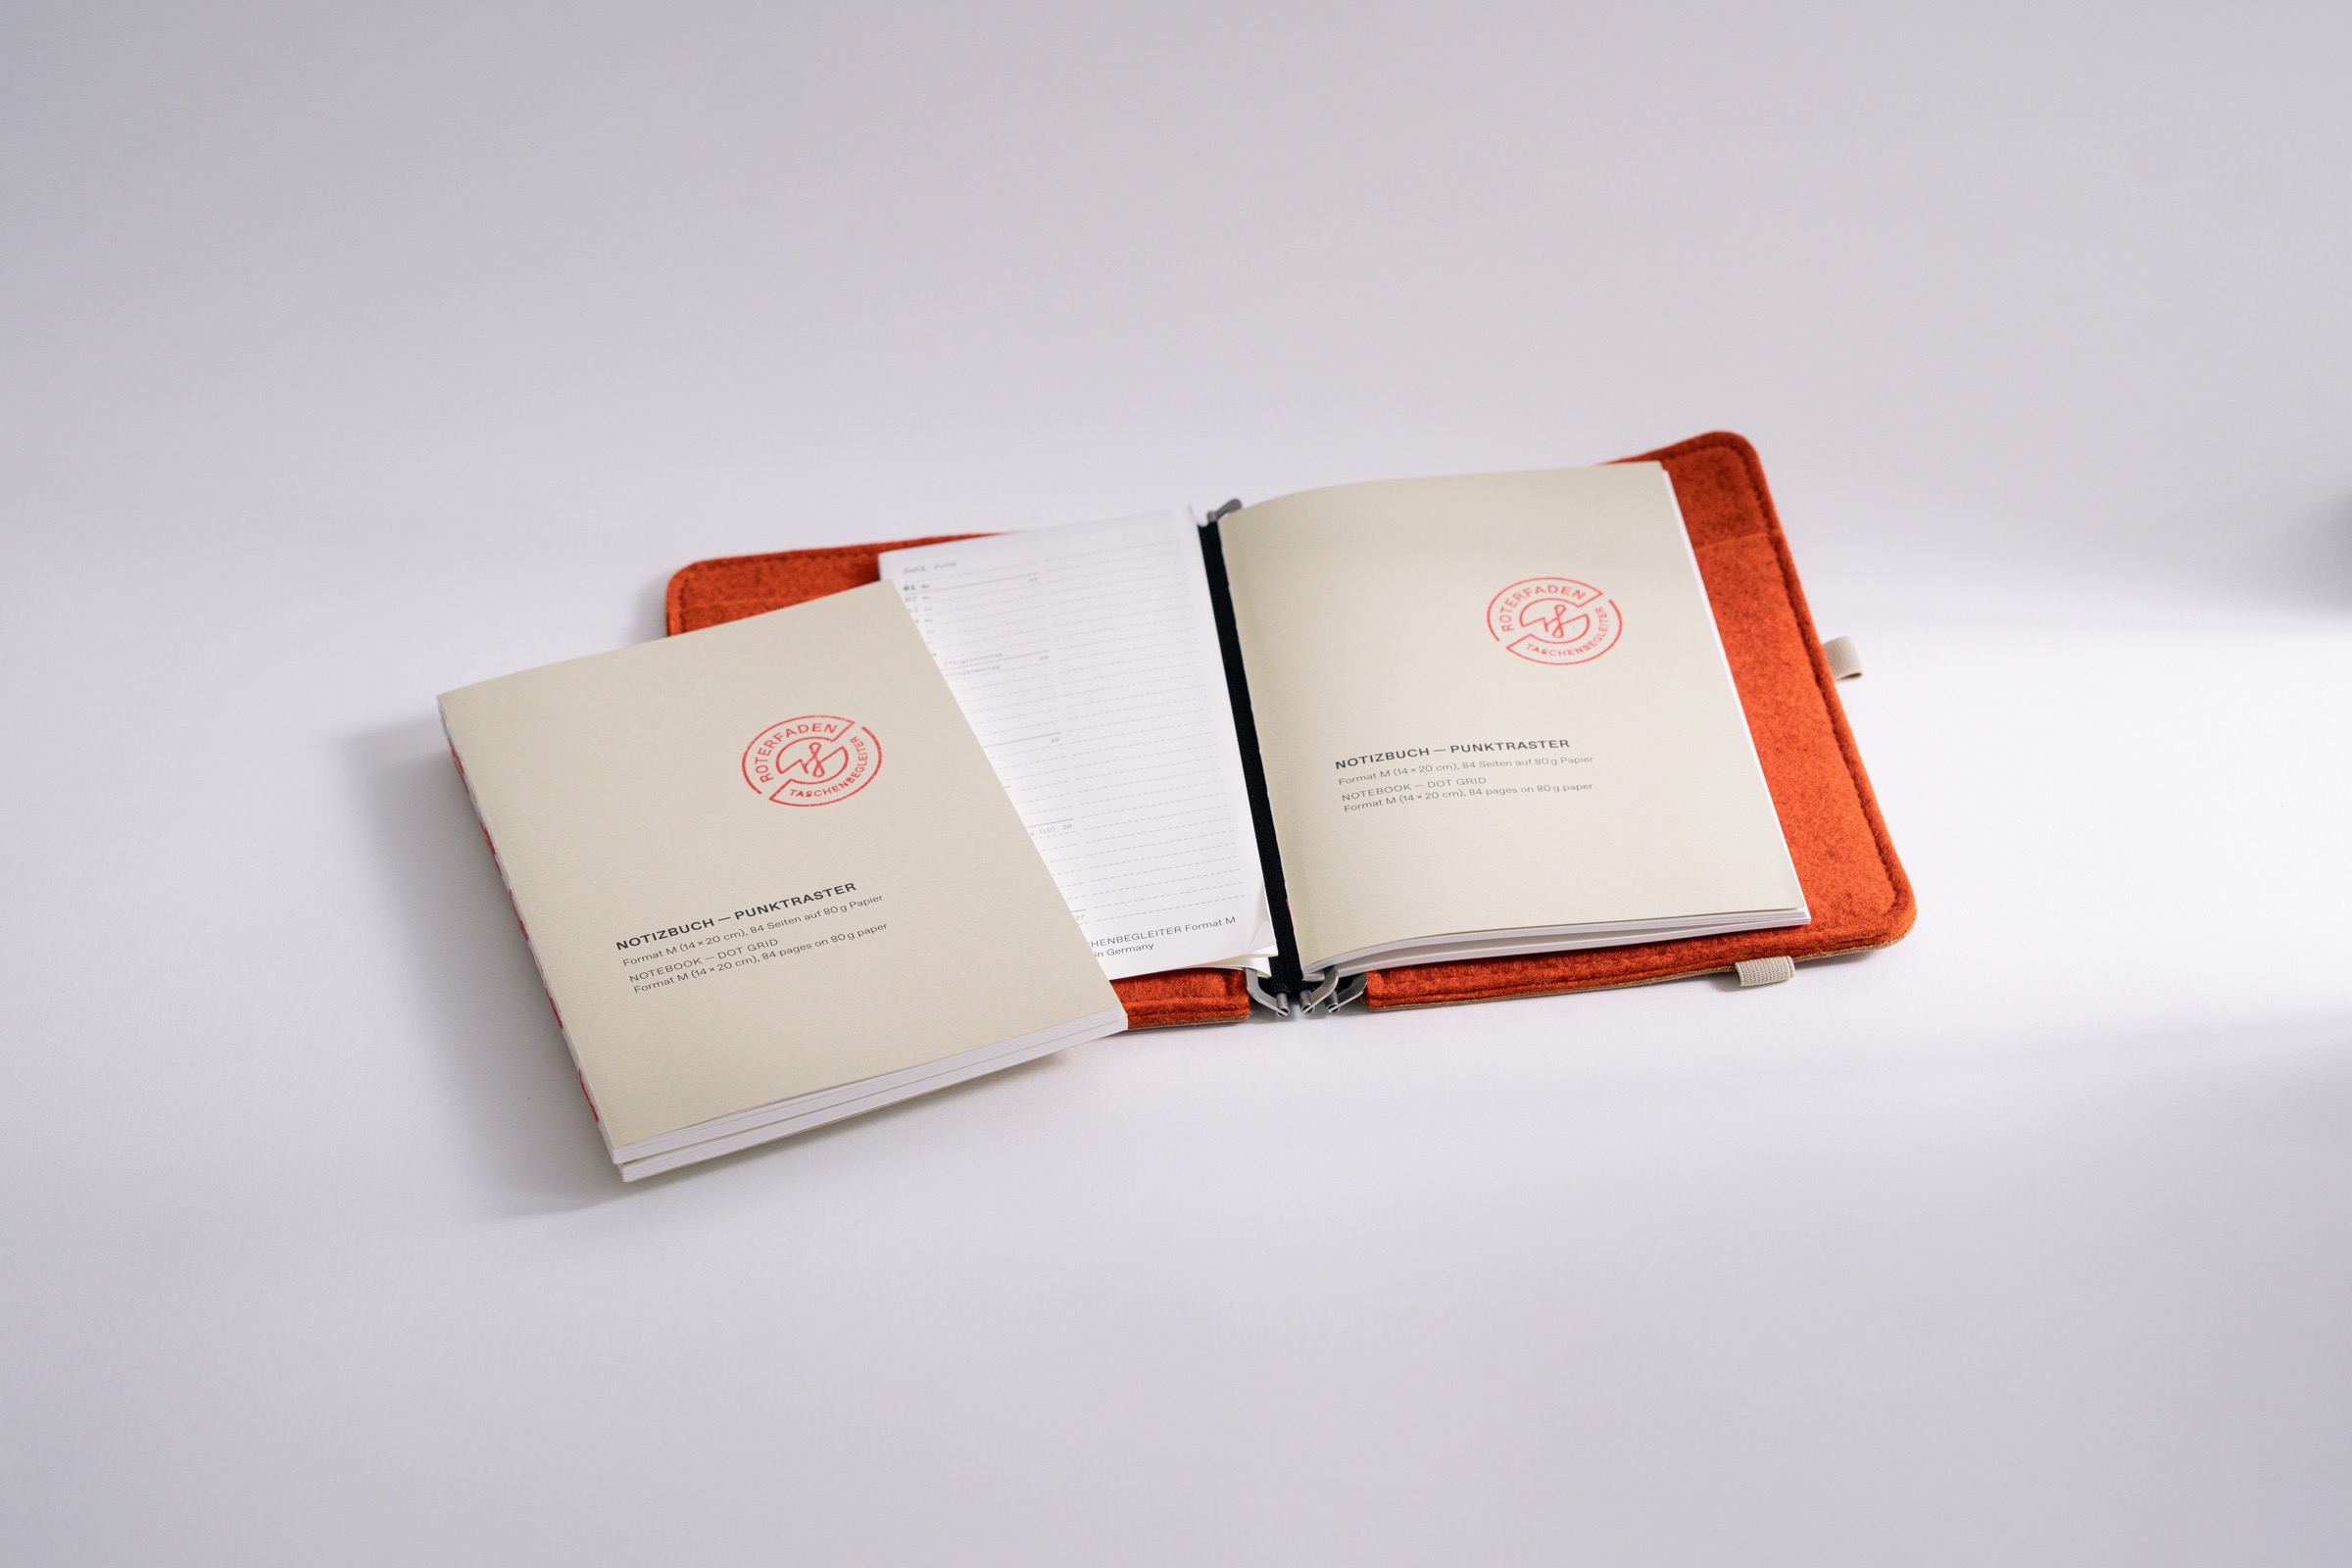 Roterfaden notebook with sturdy recycled cardboard cover, available in various sizes in dot grid or blank. Natural white paper.